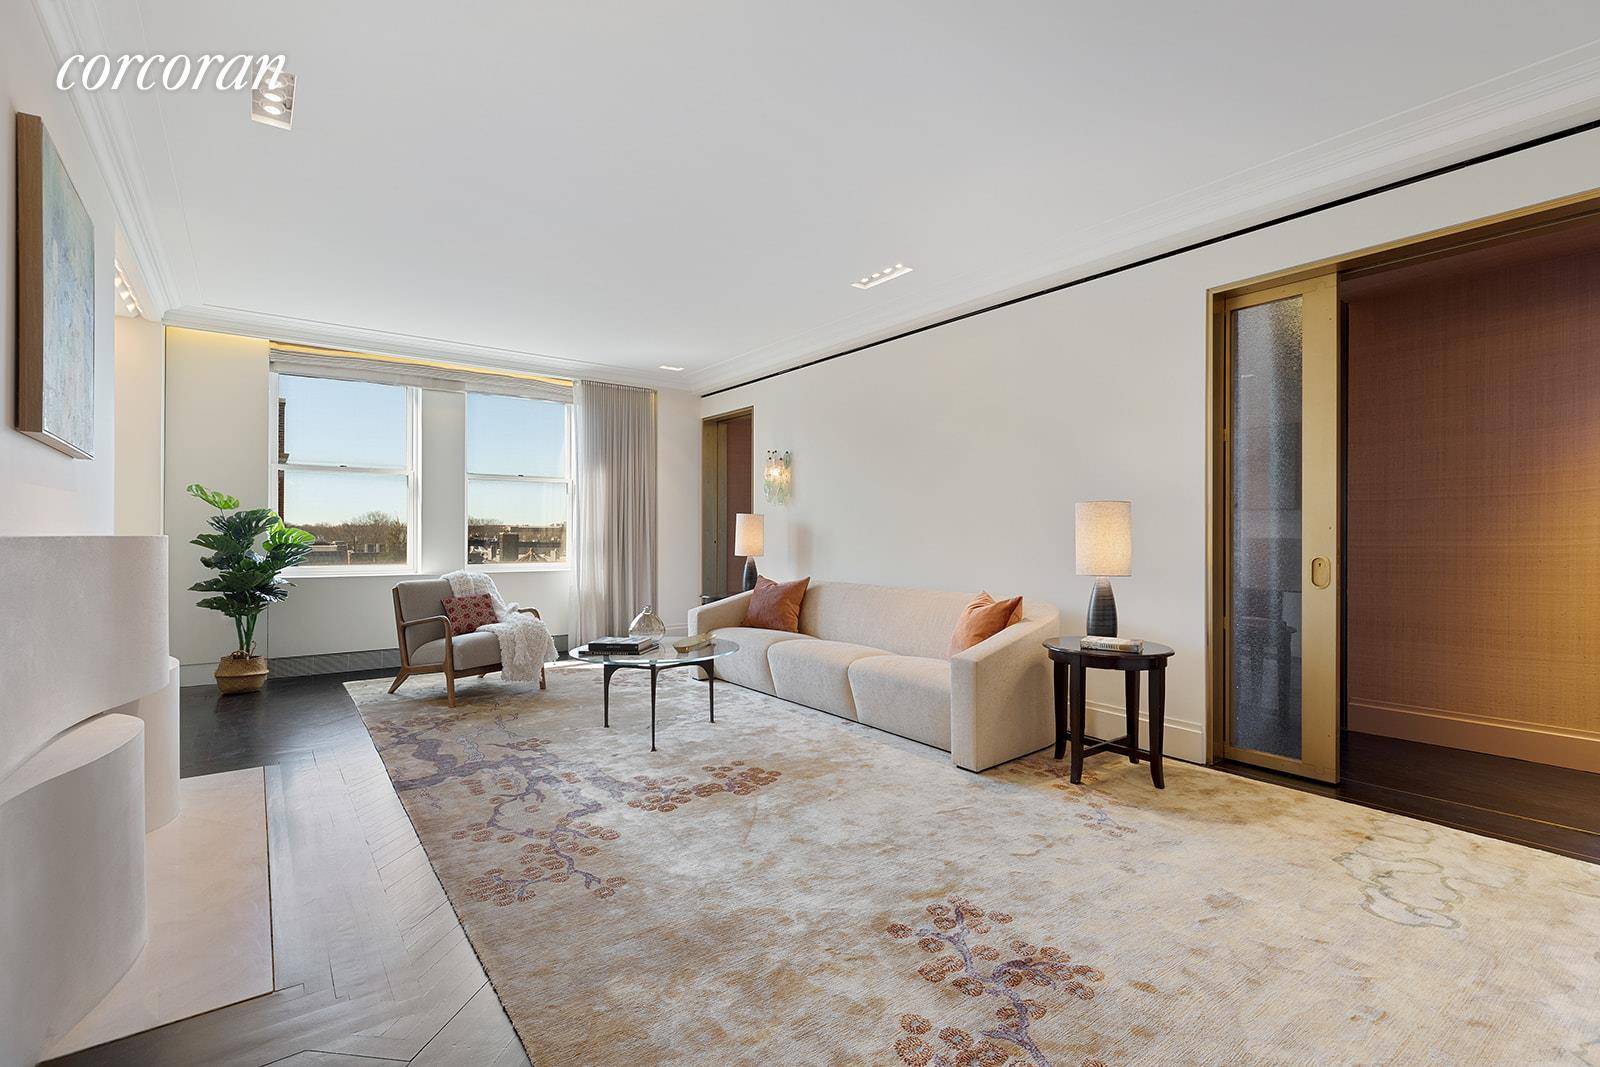 Unparalleled views, light and space in a luxuriously renovated home in Park SlopeA s most coveted full service building.